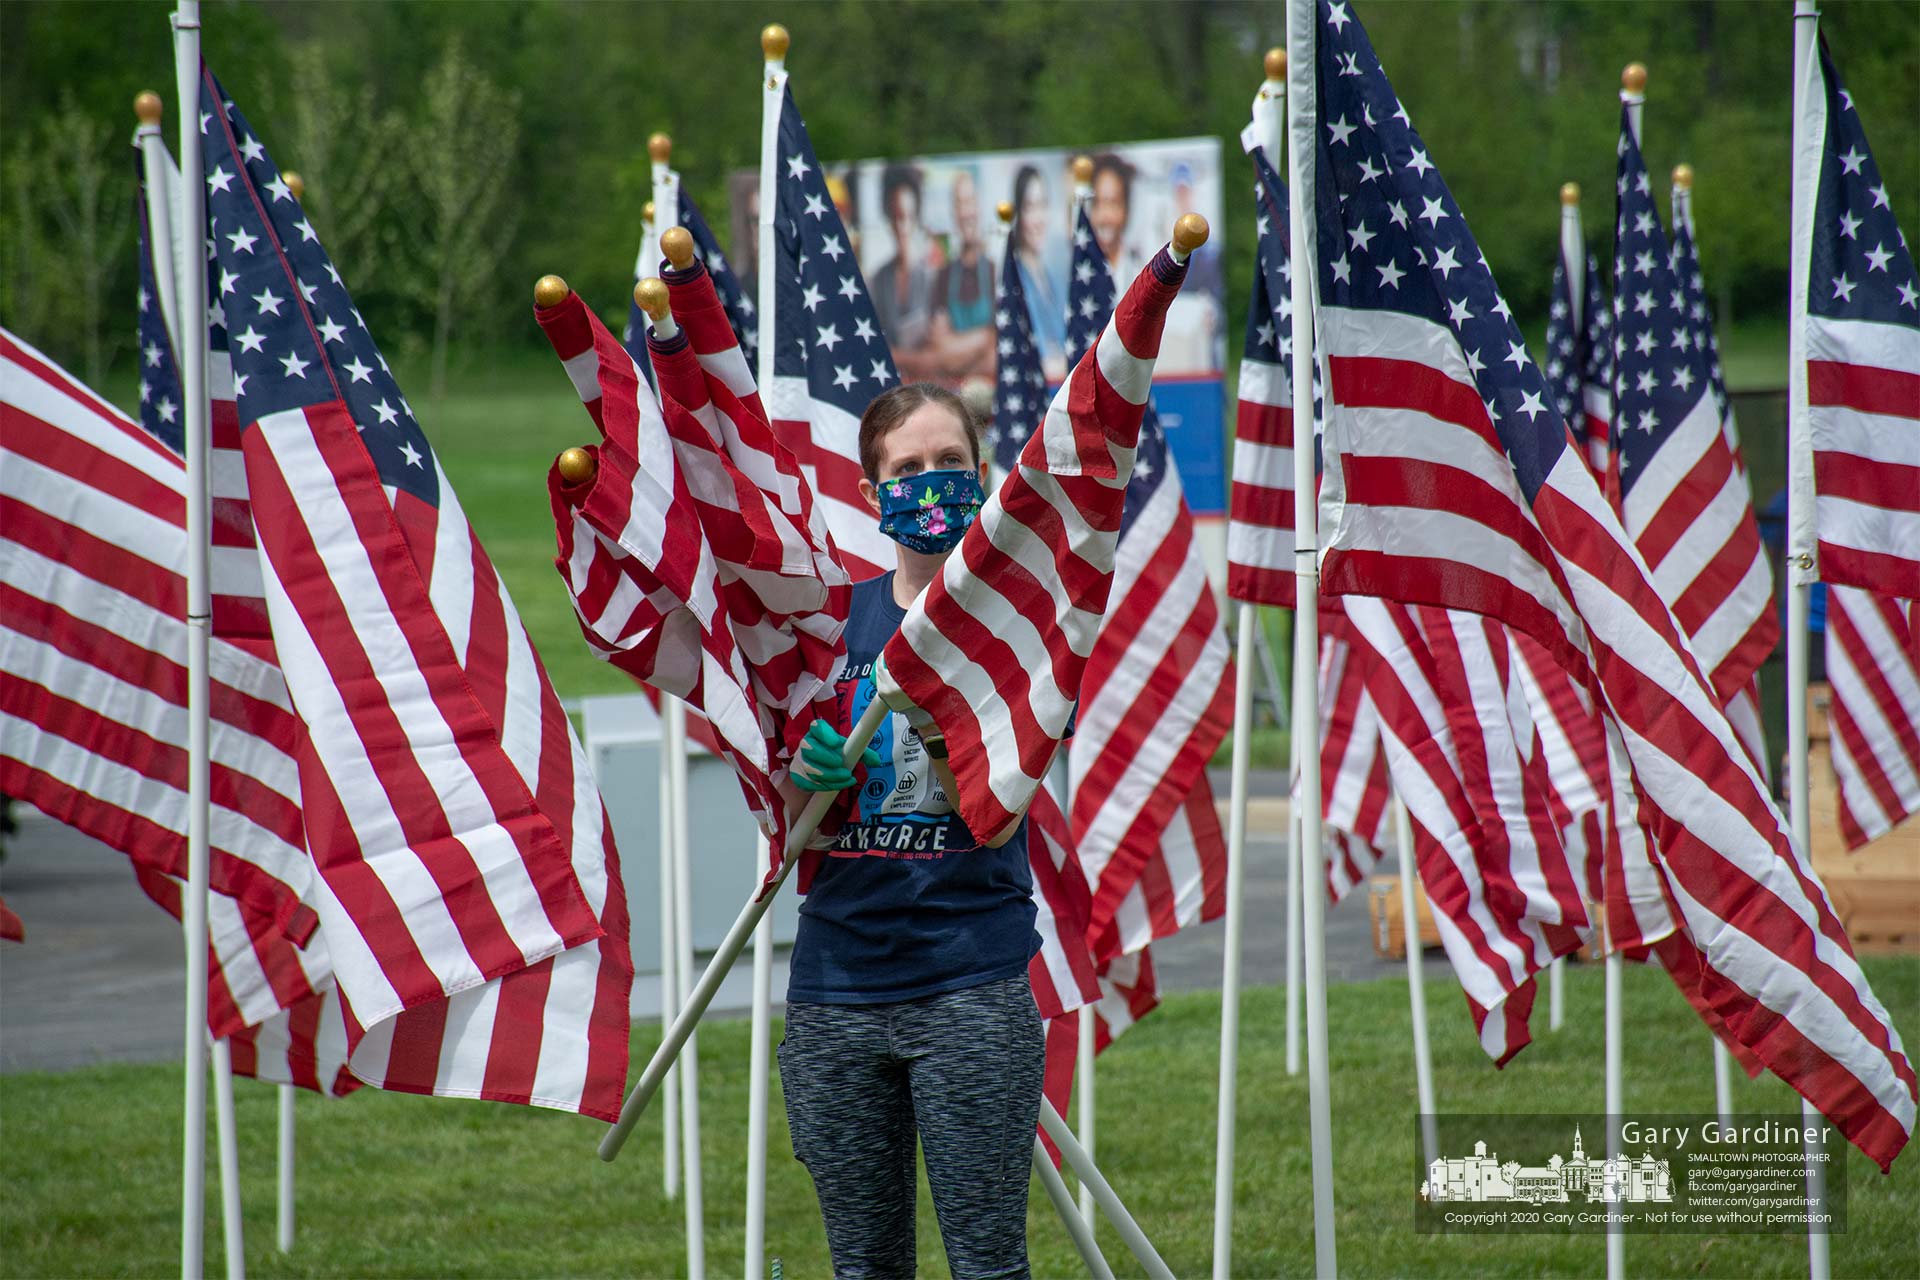 Volunteers from Sunrise Rotary place 3,000 flags into the sports fields on Cleveland Avenue for Field of Heroes celebration over the Memorial Day weekend. My Final Photo for May 22, 2020.